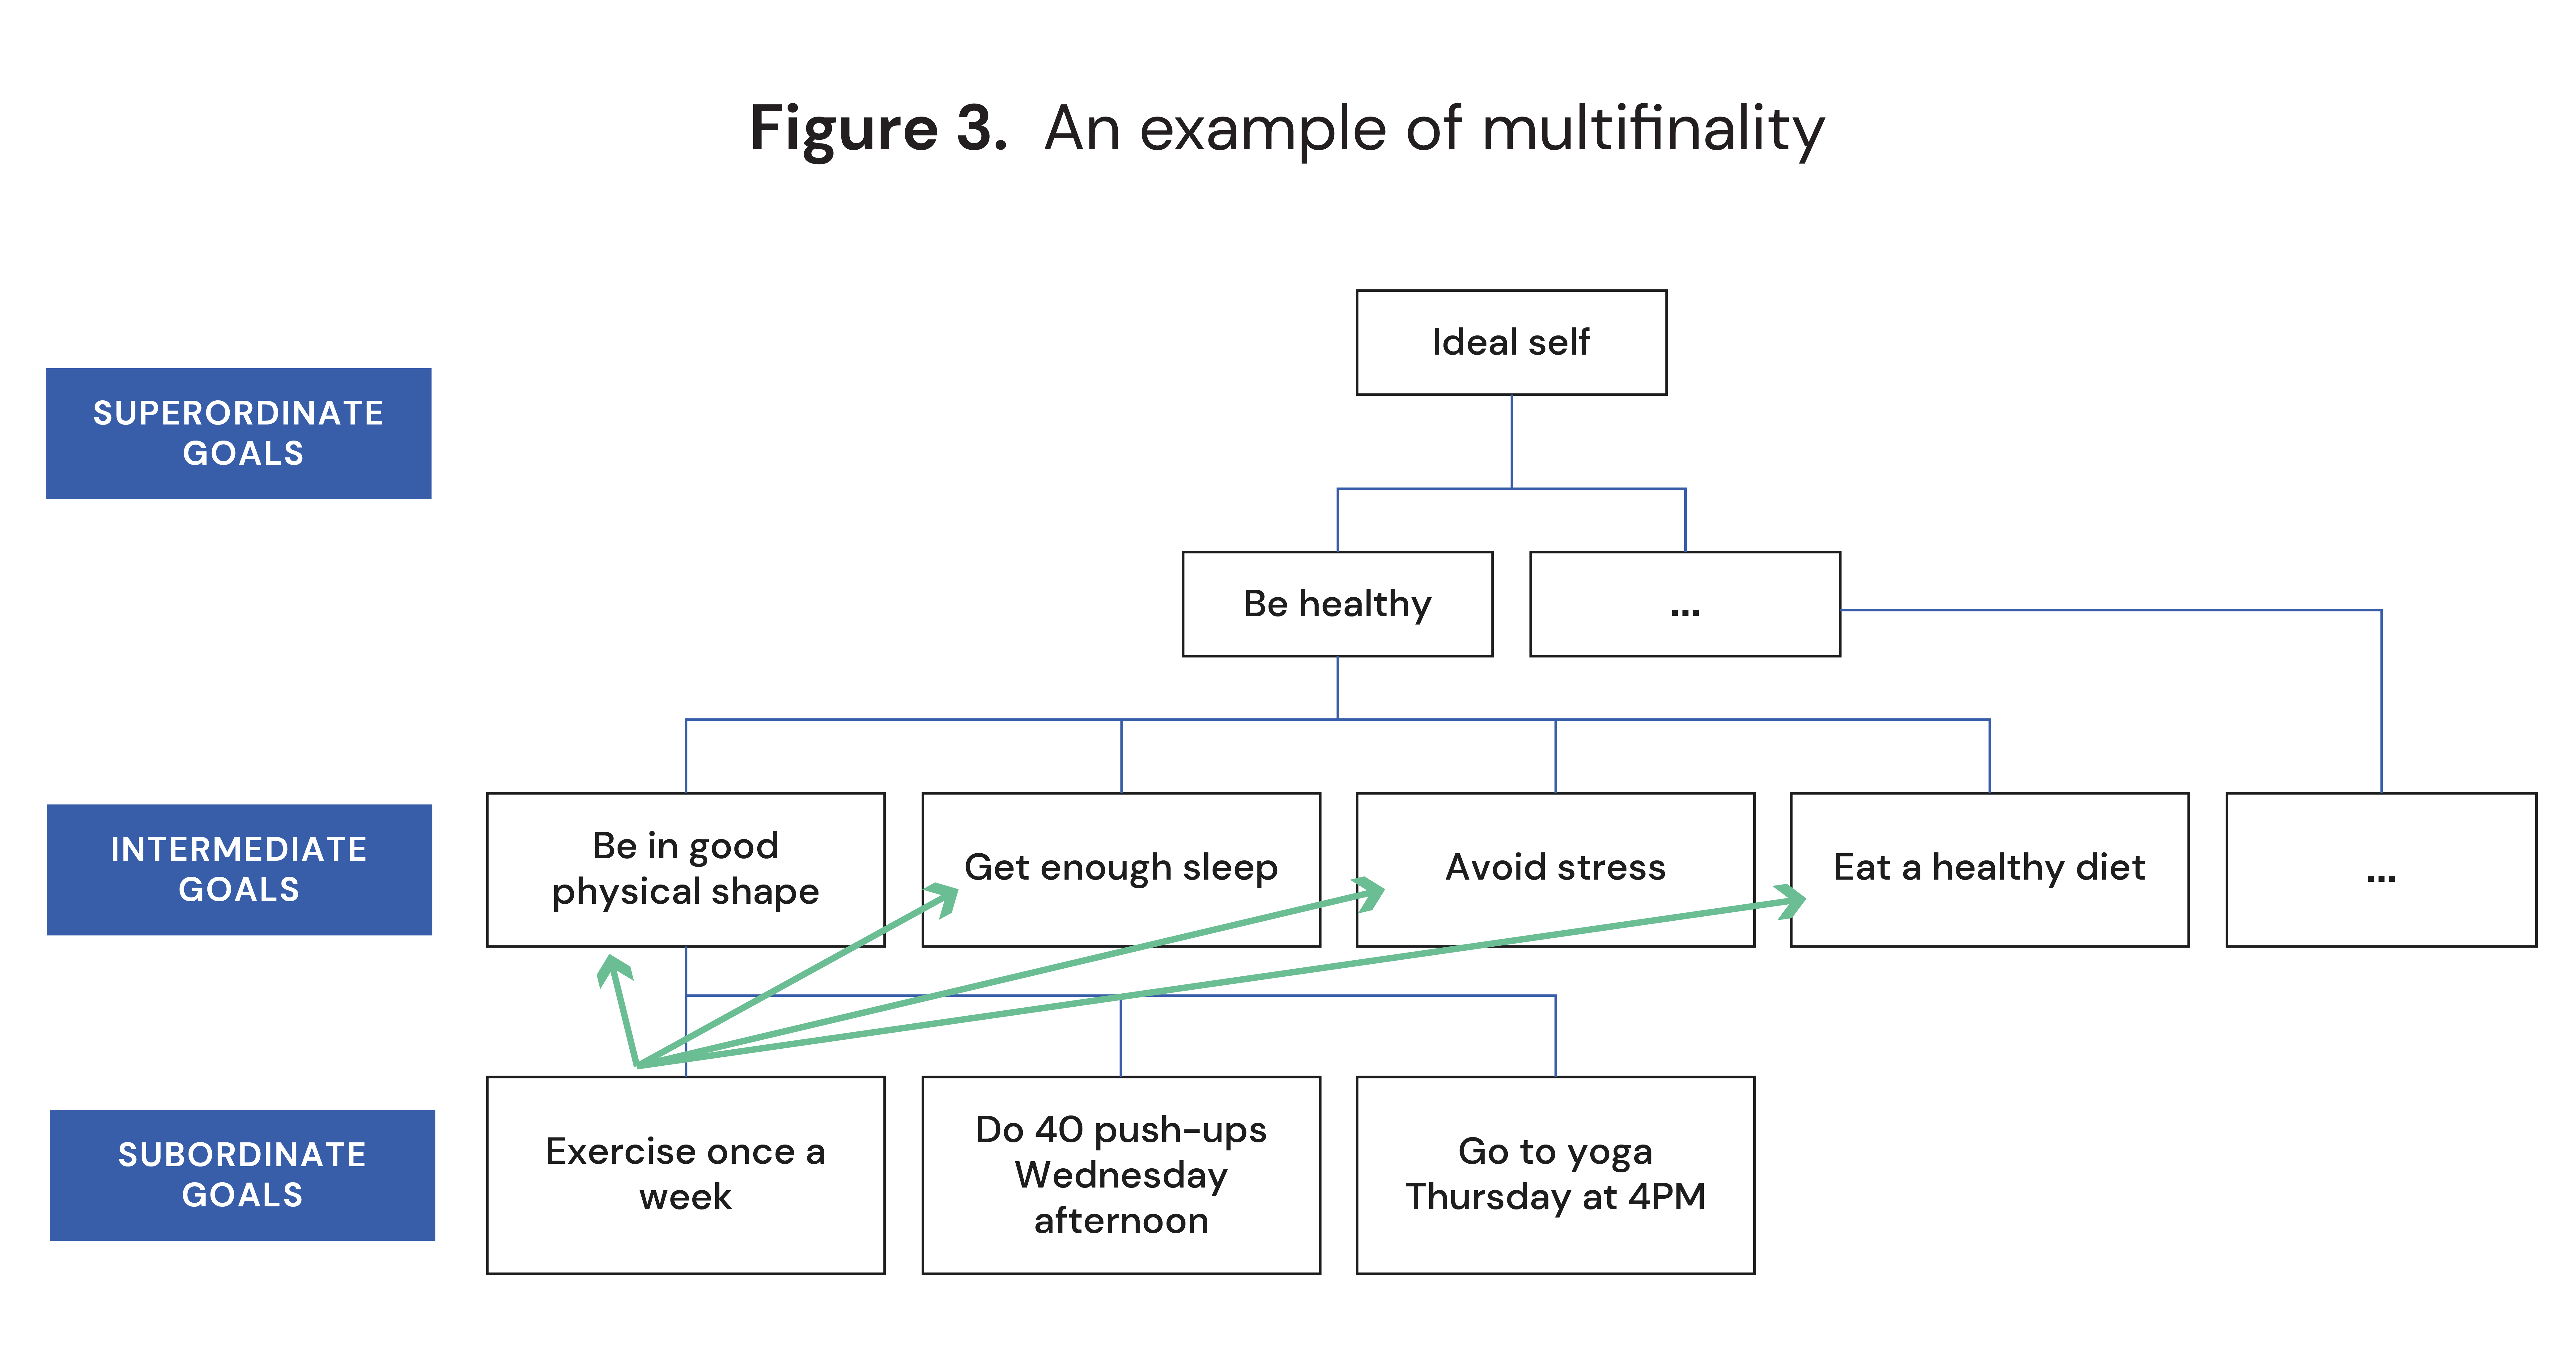 An example of multifinality in a goal hierarchy 